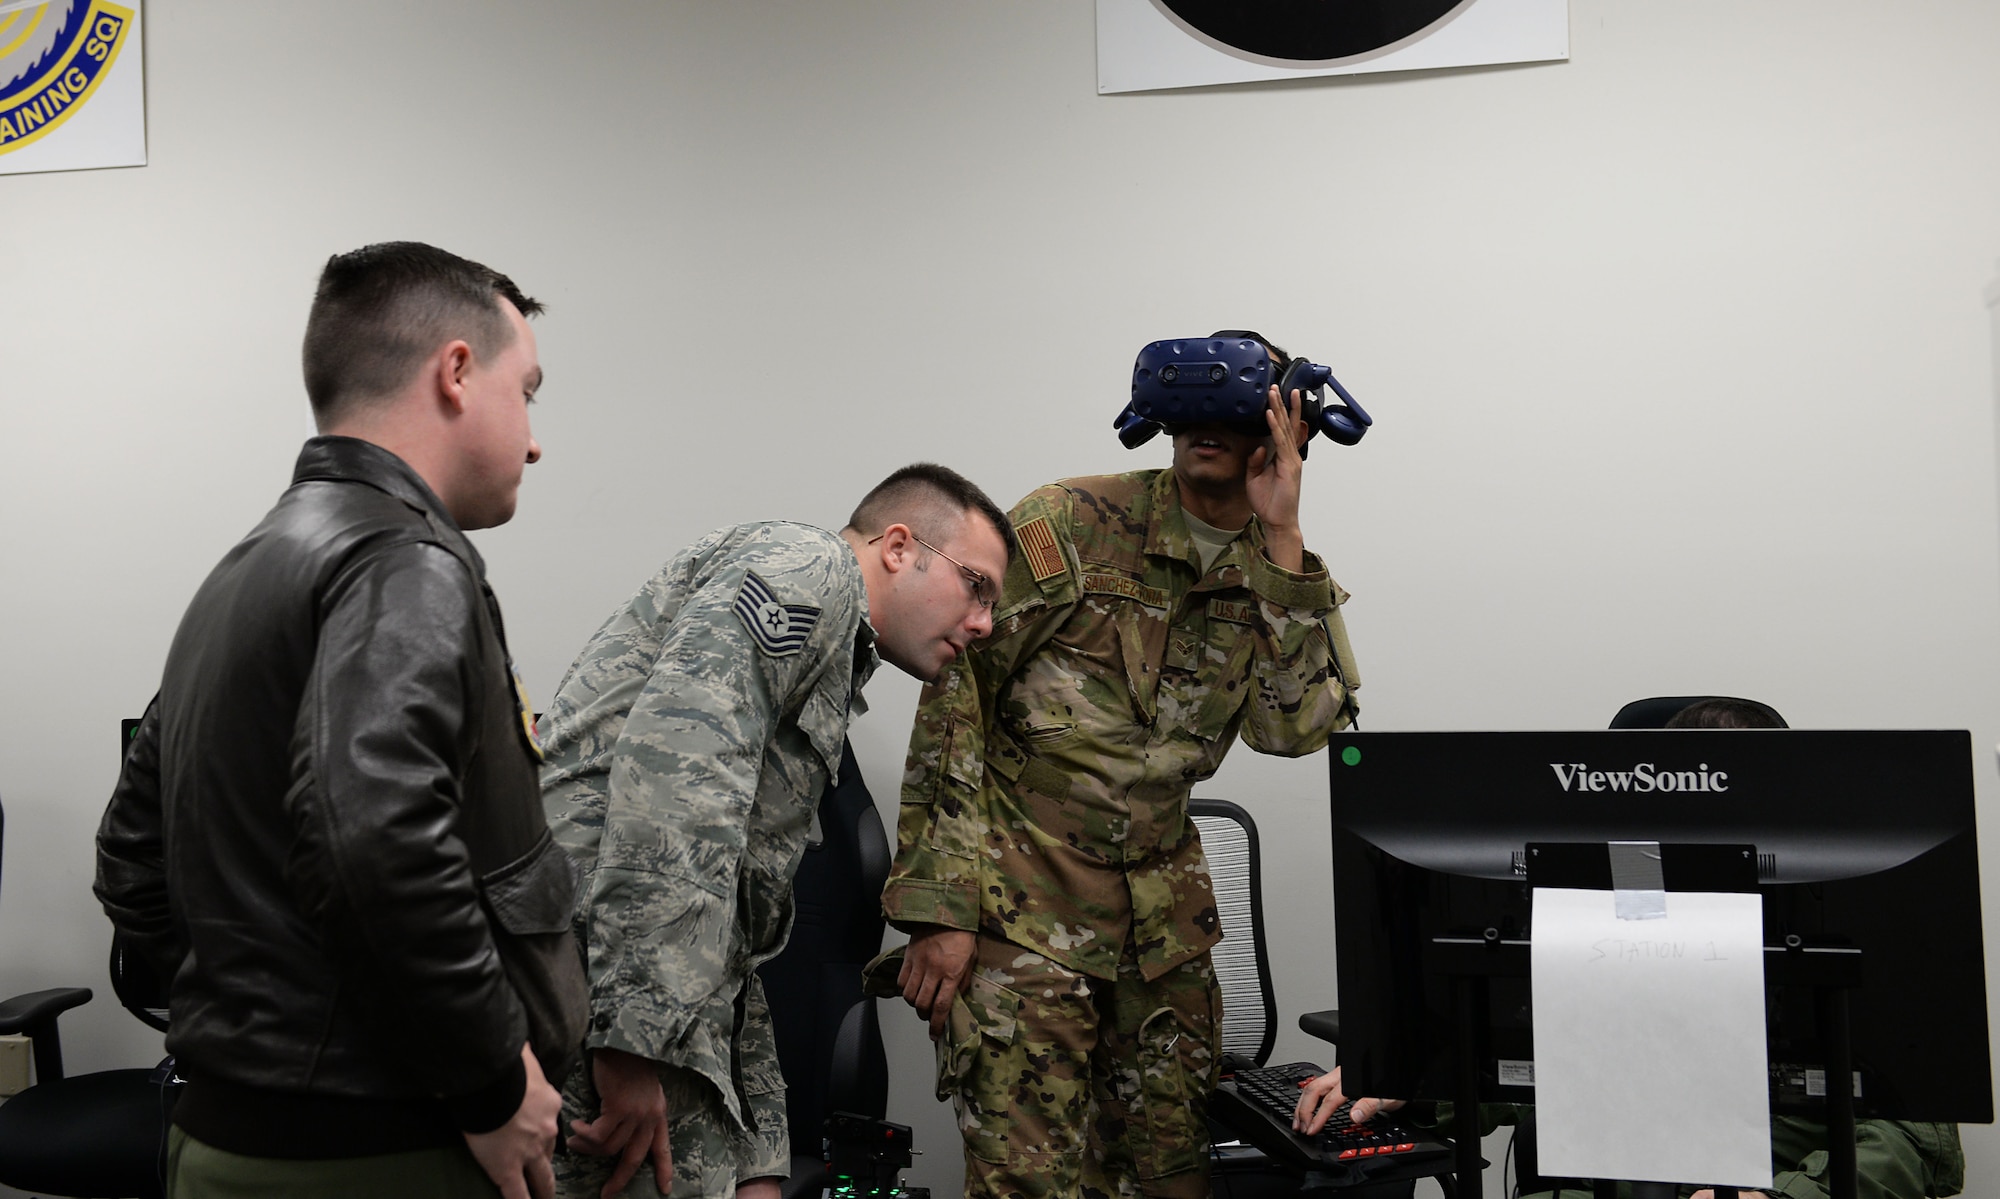 Airmen from the 552nd Air Control Wing at Tinker Air Force Base, Oklahoma, try on virtual reality equipment Feb. 13, 2018, on Columbus AFB, Mississippi. They toured areas in the 14th Operations Group to see how the Columbus AFB Spark Cell has aided in projects utilizing the innovation for faster and better daily operations. (U.S. Air Force photo by Airman Hannah Bean)